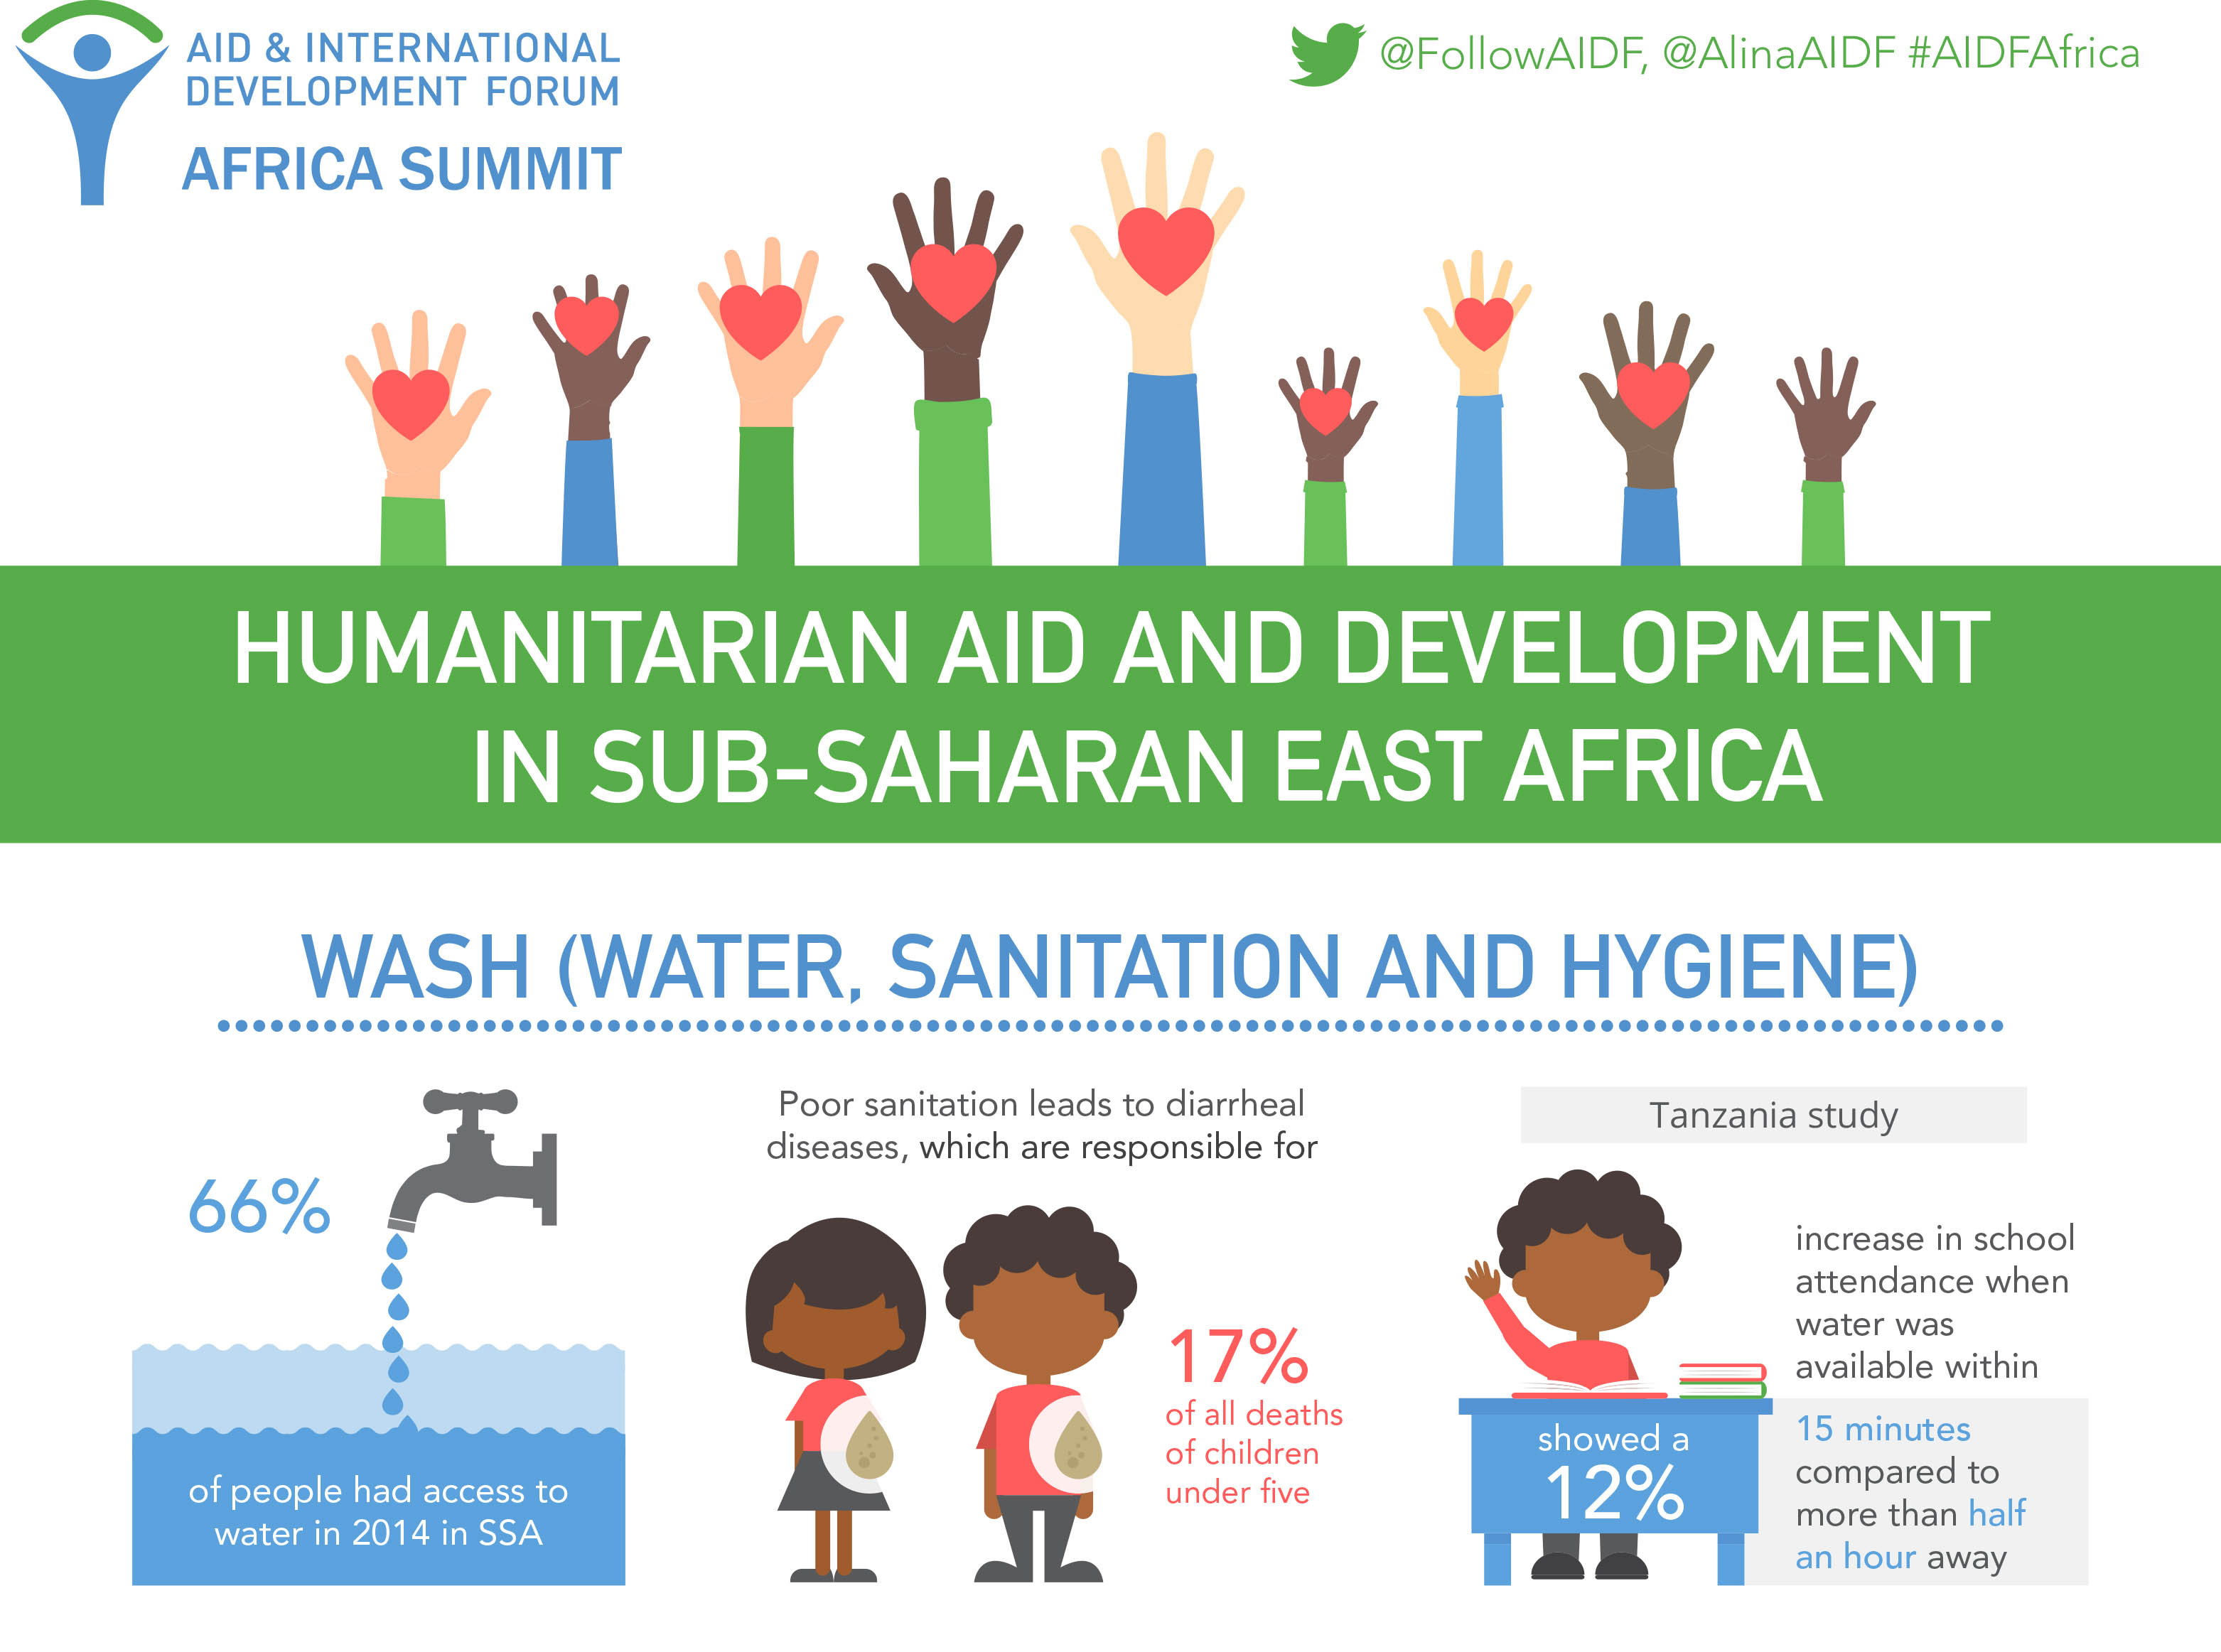 [INFOGRAPHIC] WASH in Sub-Saharan East Africa